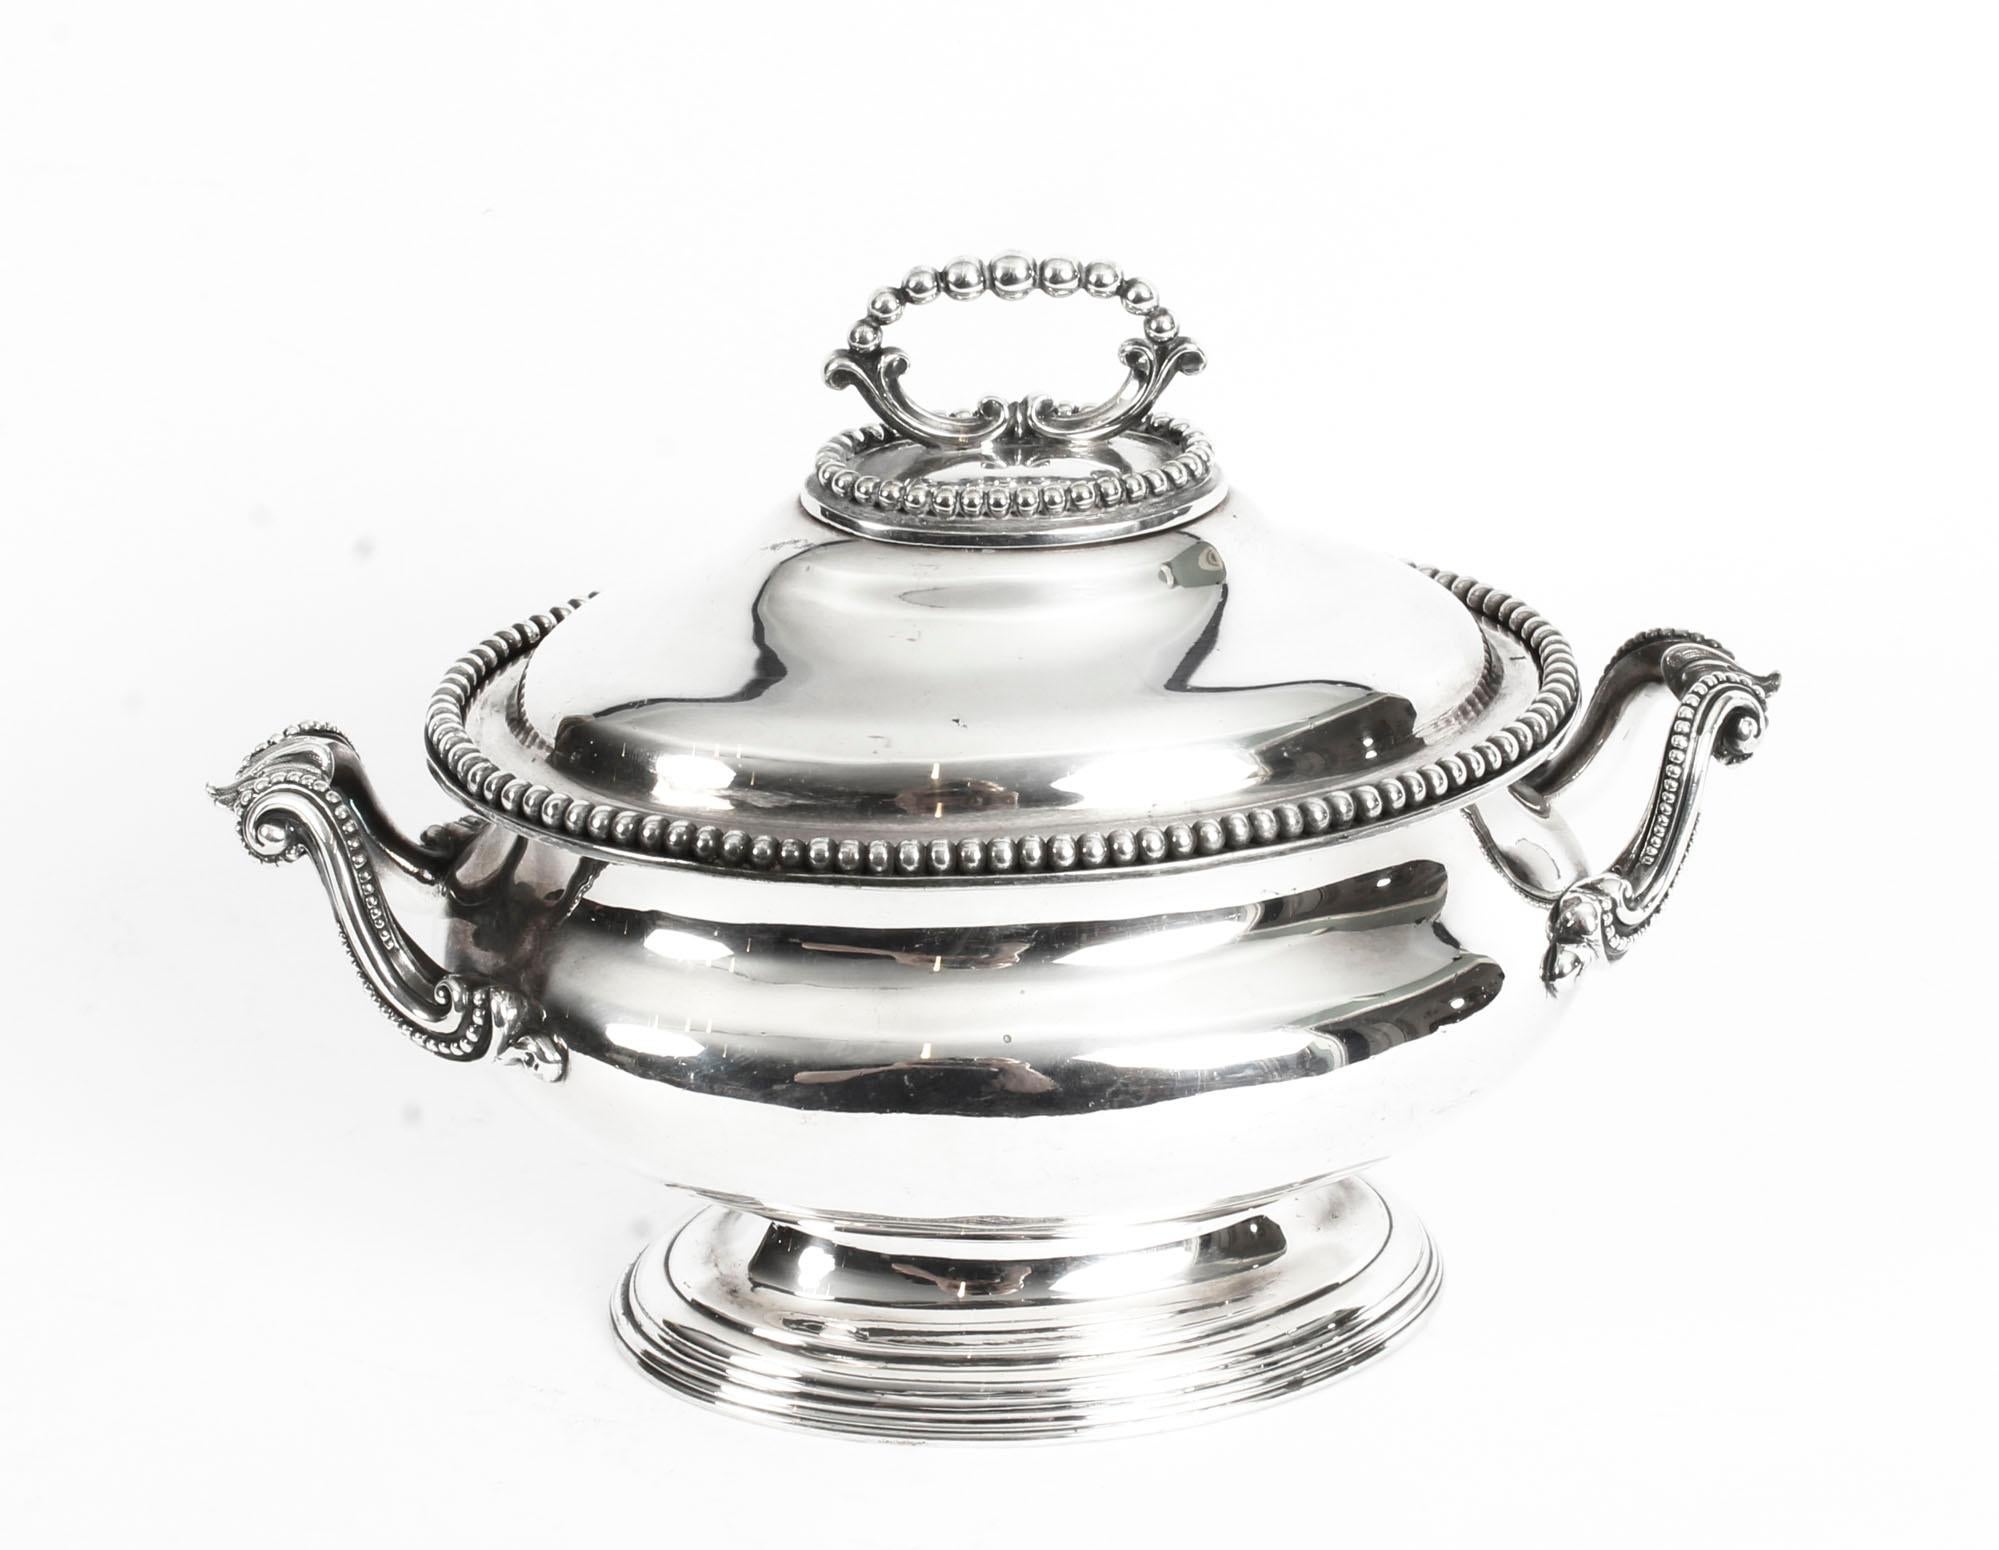 This is an exquisite and rare antique English silver plated sauce tureen, circa 1860 in date.
 
This lovely sauce tureen is oval in shape and features splendid beaded decoration to the border, the two graceful handles which are positioned one to